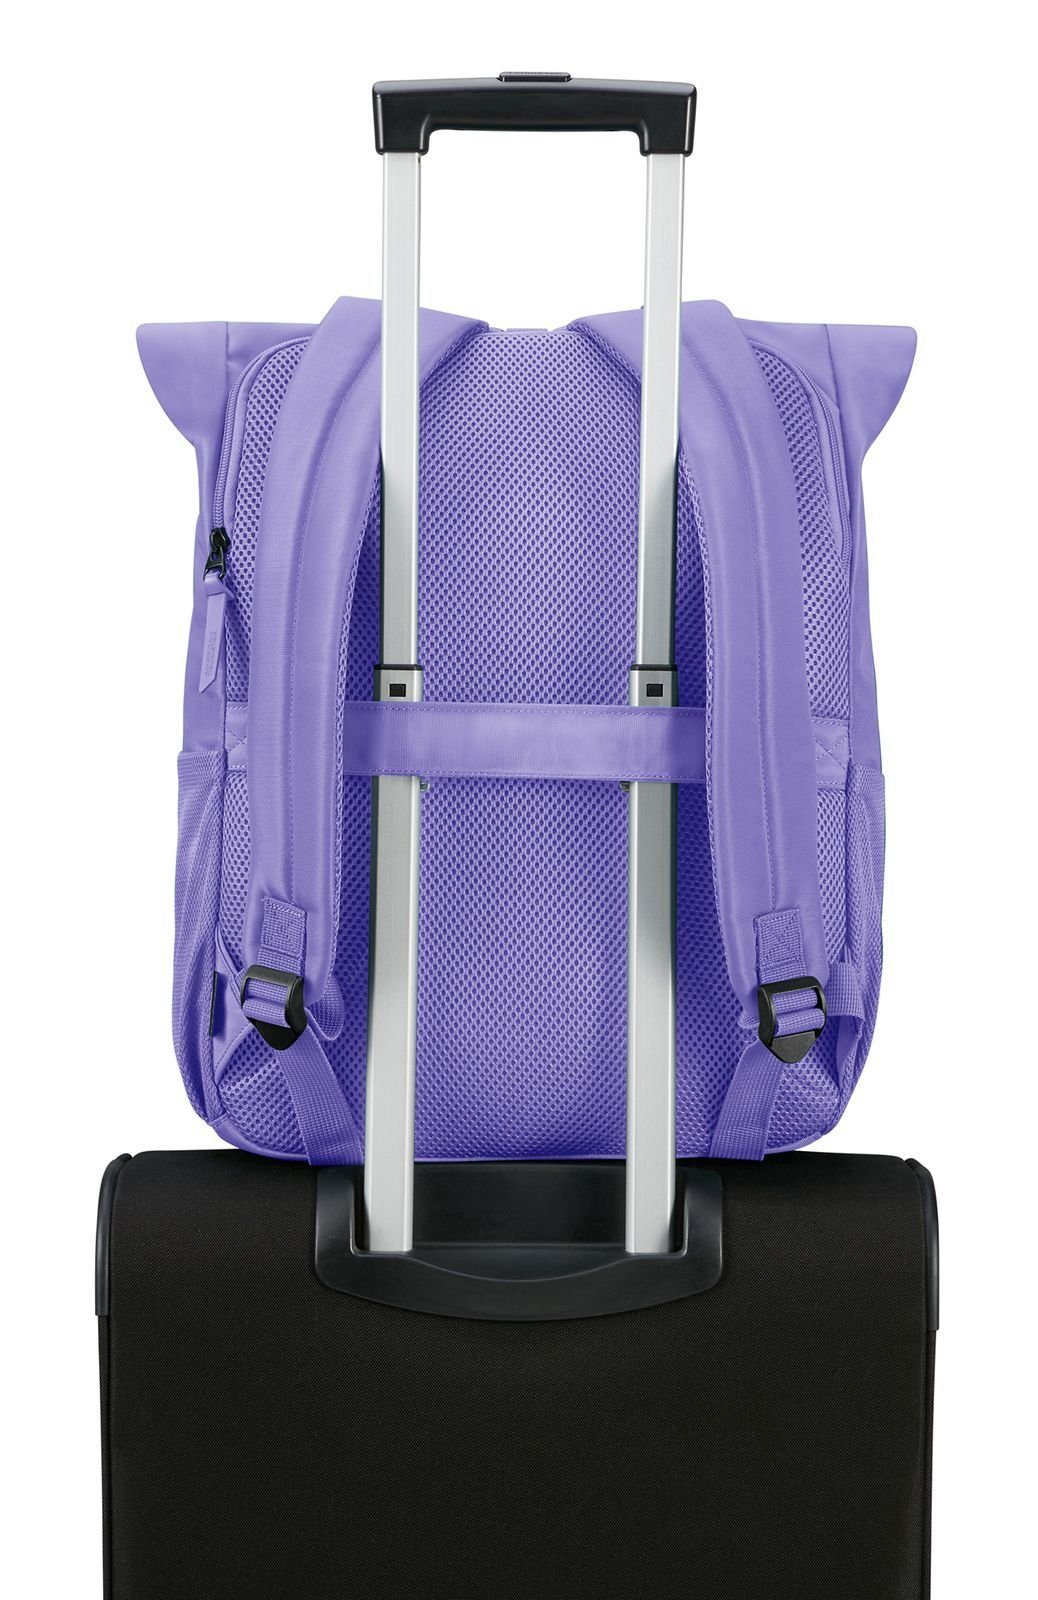 American Tourister® Lilac Soft Groove Urban Rucksack